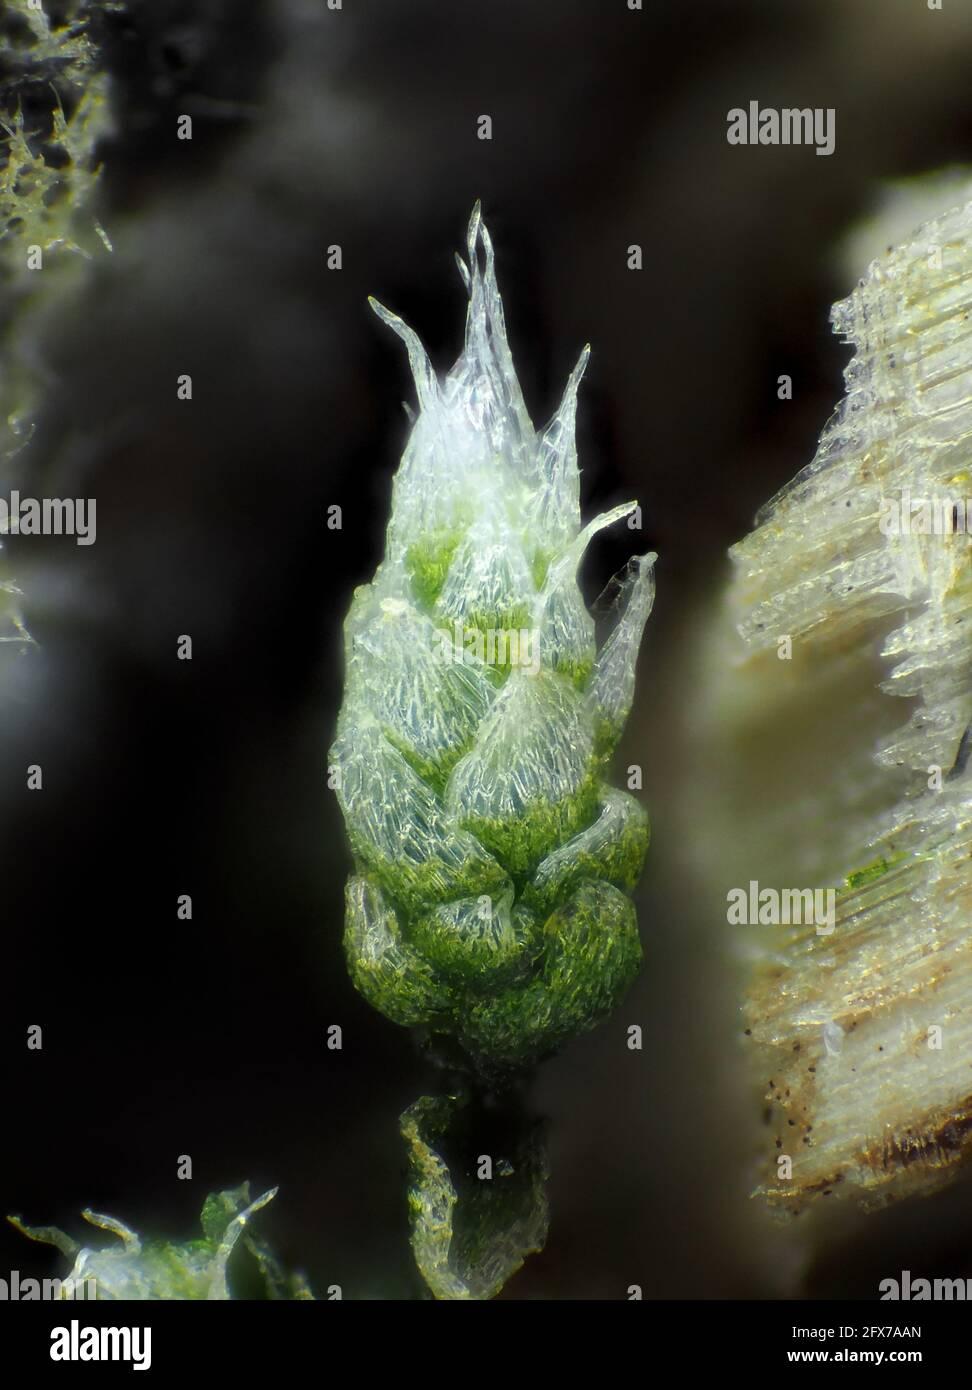 very-young-moss-likely-bryum-argenteum-under-the-microscope-vertical-field-of-view-is-about-11mm-2FX7AAN.jpg